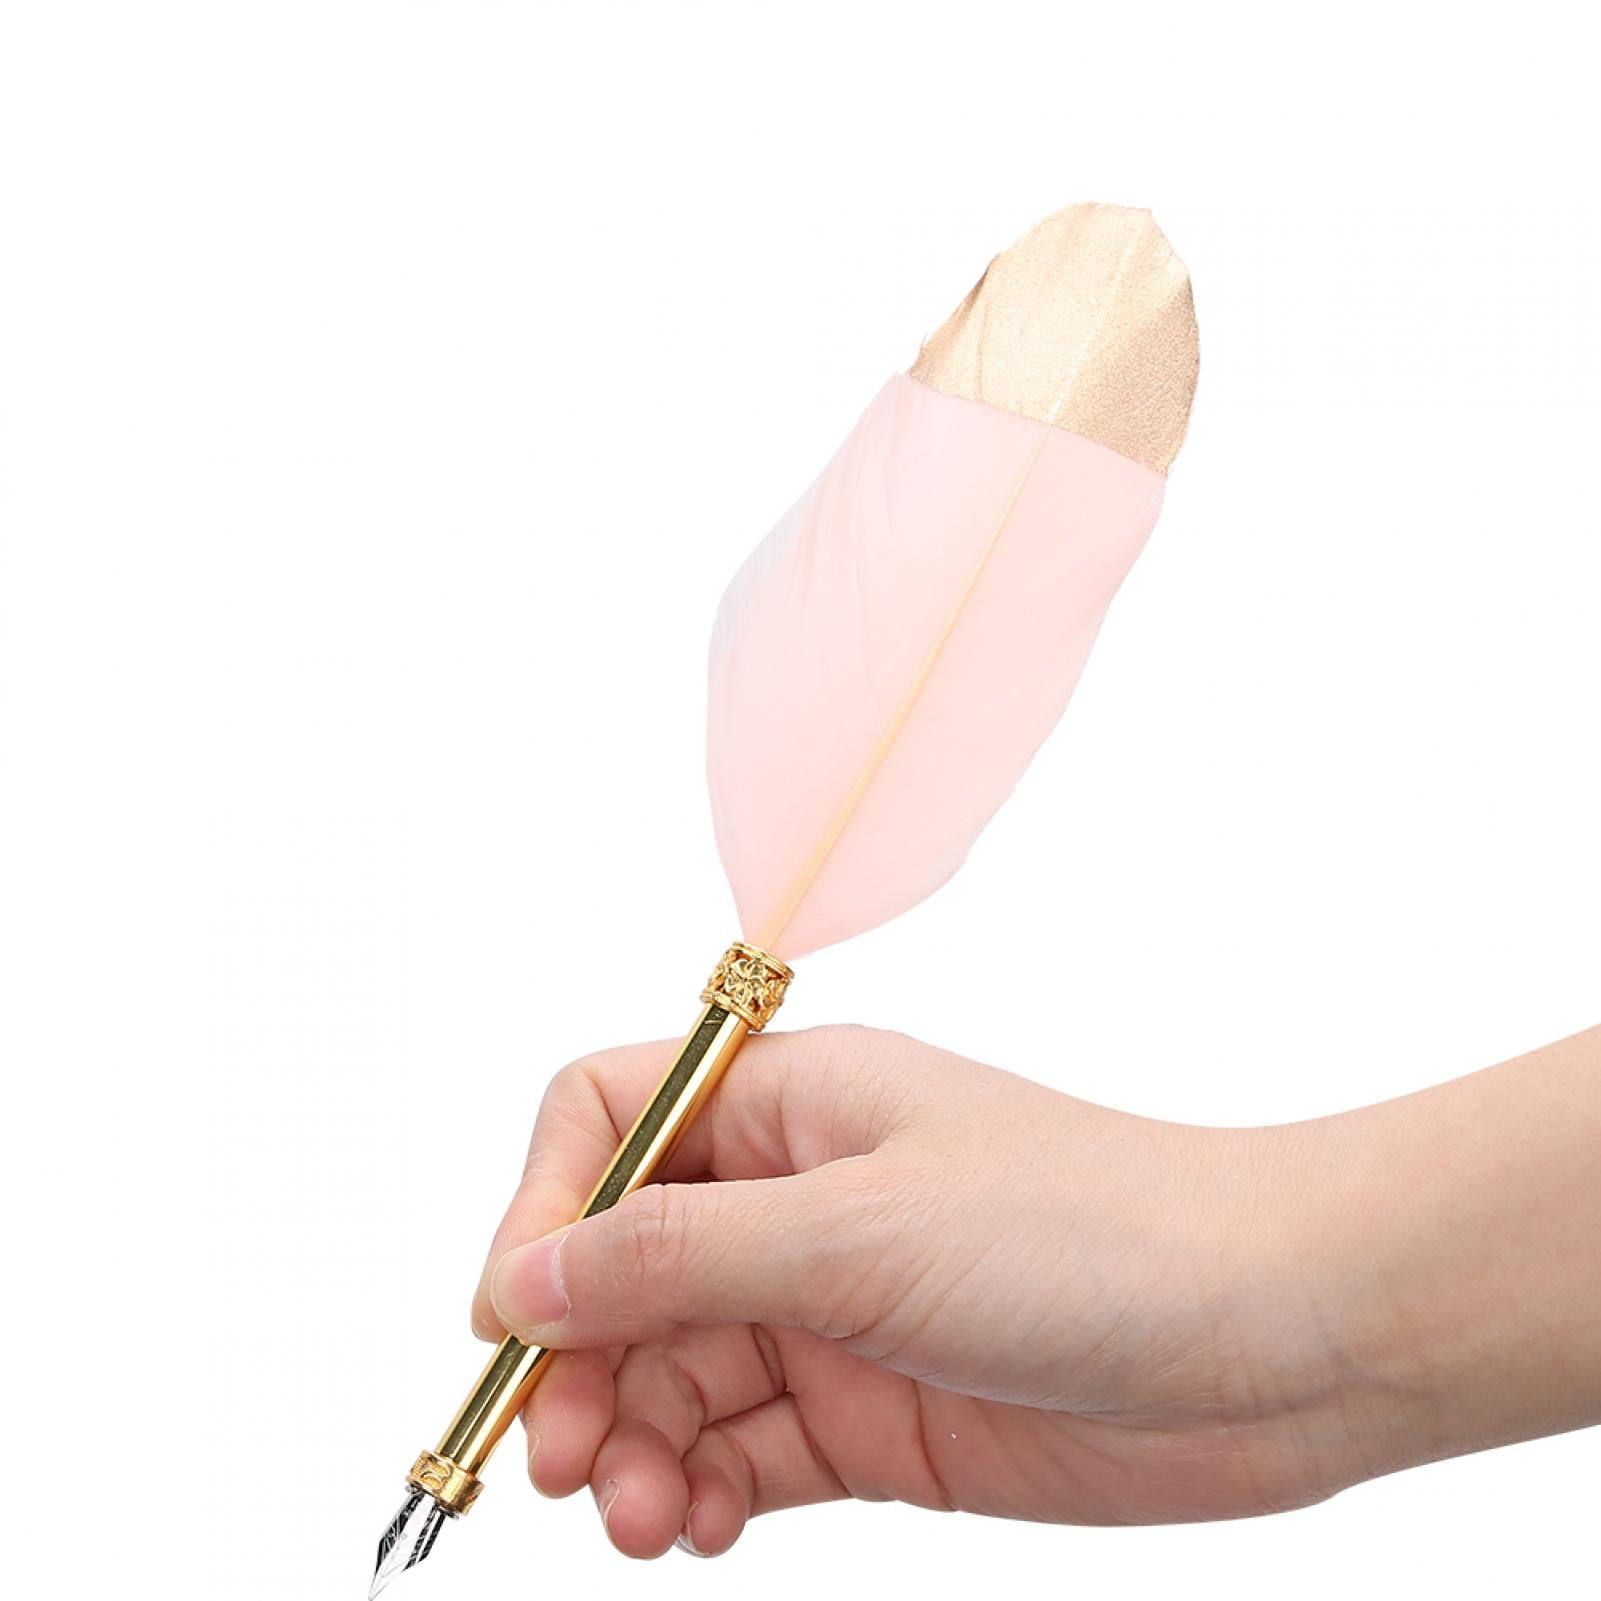 Feather Pen,Dip Feather Pen,Gold and Pink Feather Pen Business Fountain Dipped in Ink Retro British Fancy Calligraphy,There is a spring clip inside,you can easily replace the pen tip,easily to operate